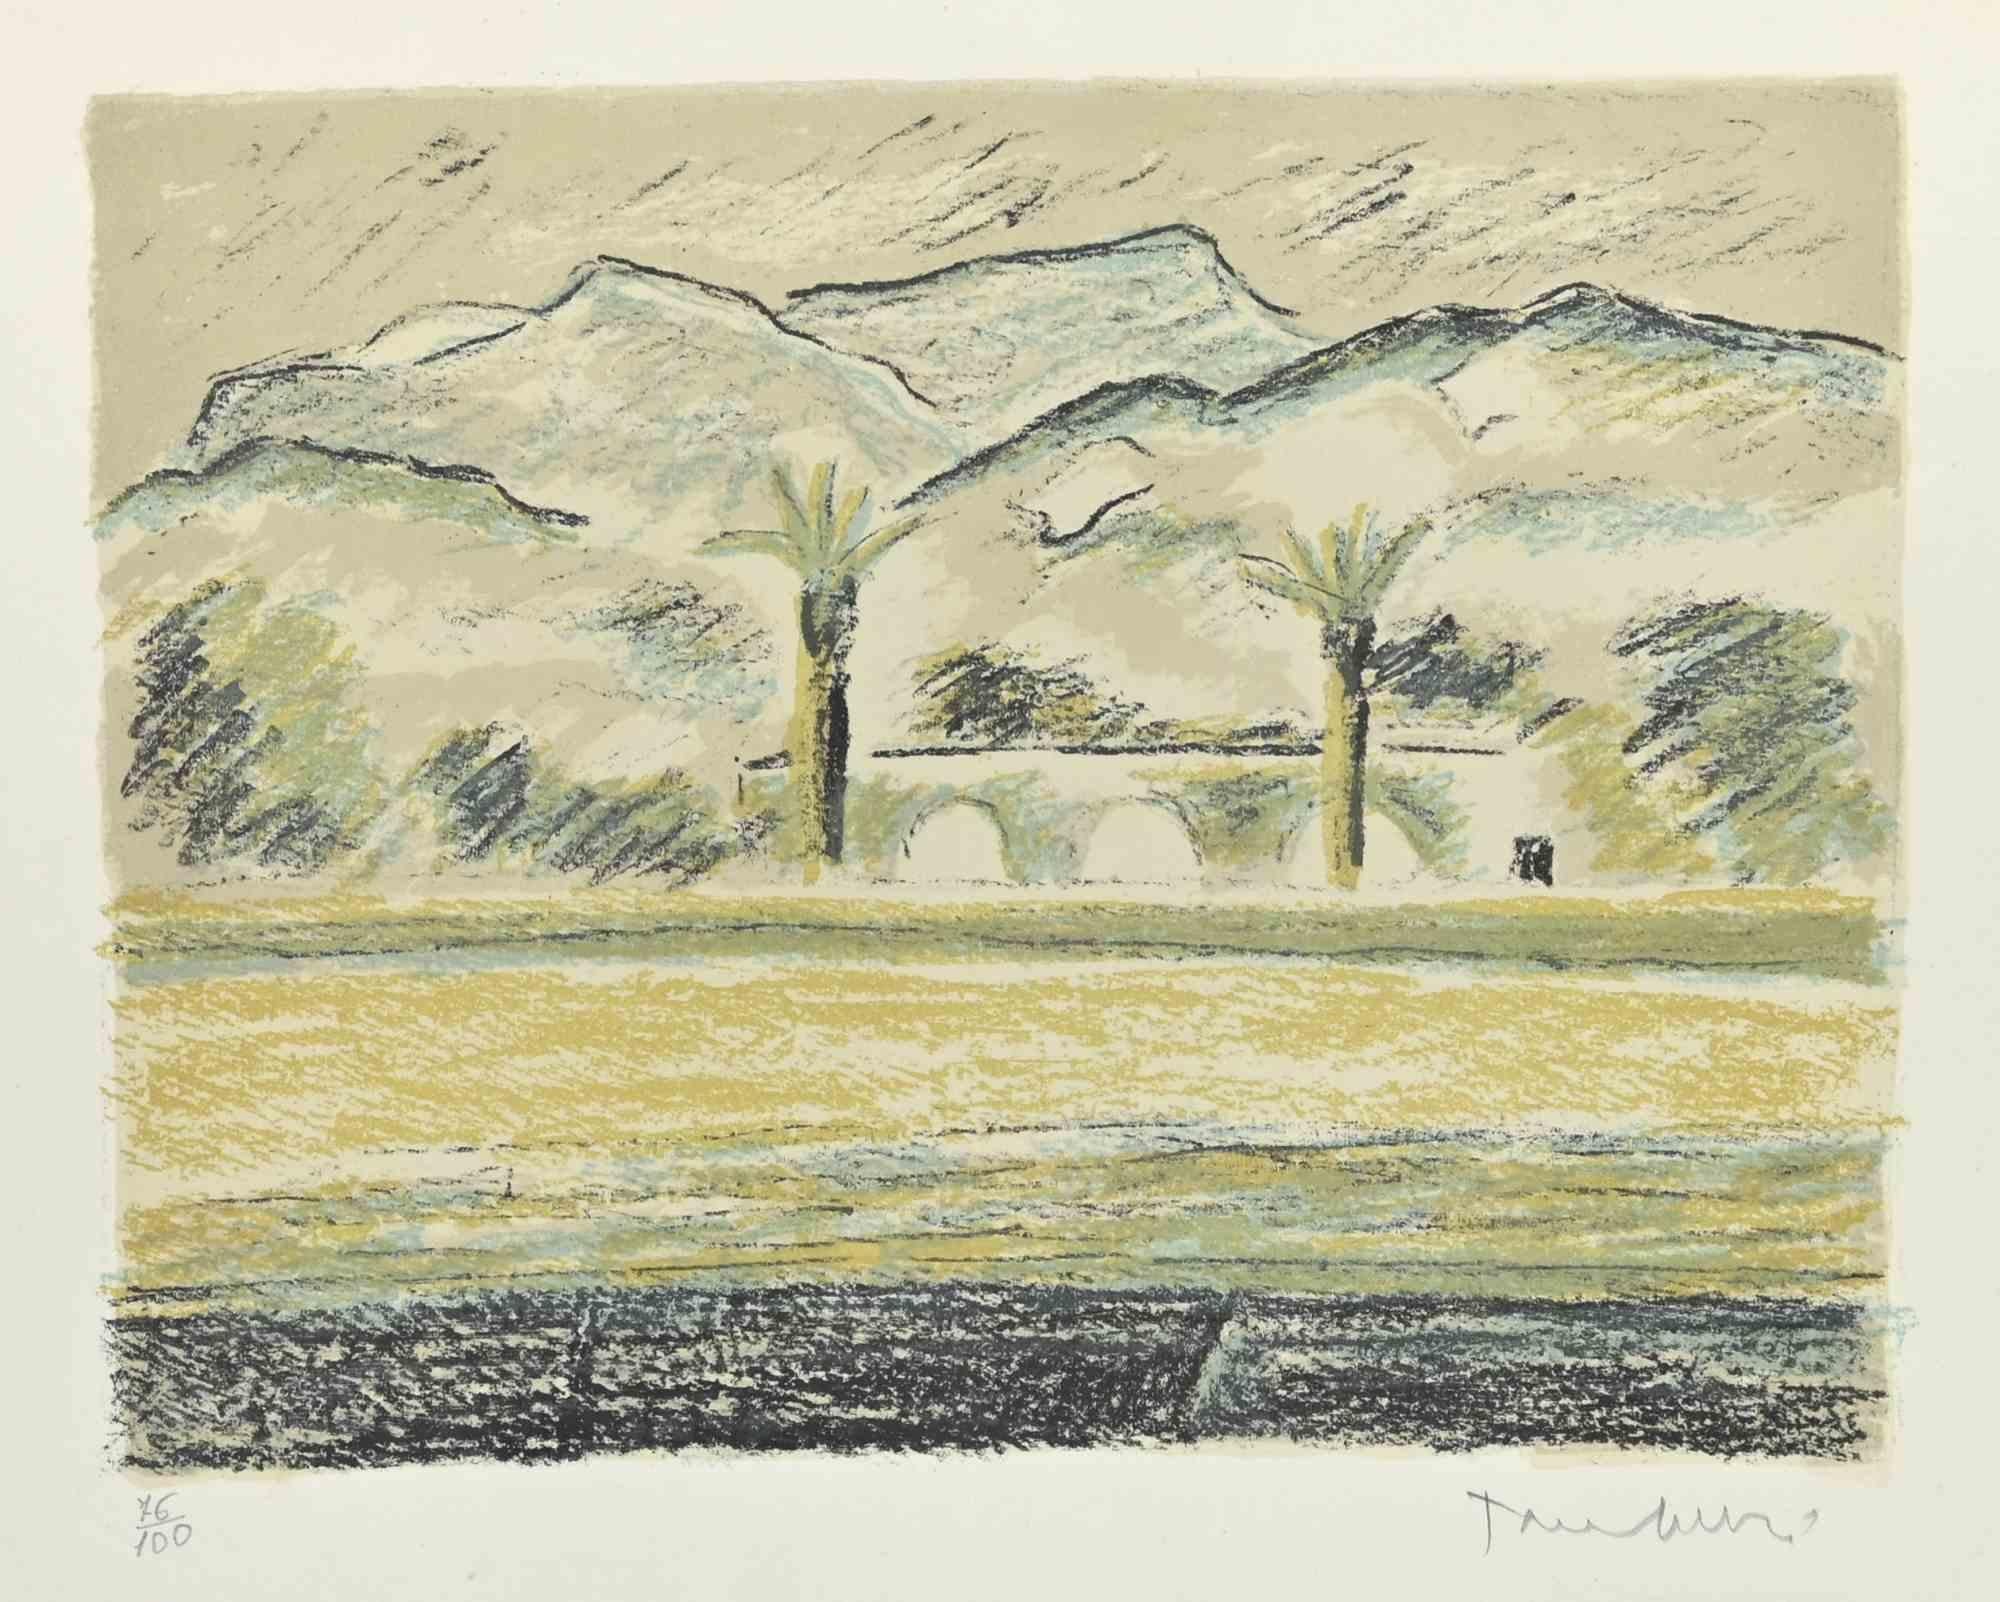  The Apuane Alps from Forte dei Marmi is a modern artwork realized by Orfeo Tamburi.

Mixed colored lithograph.

The artwork is from the serie "Paesaggi di Toscana" (Landscape of Tuscany)

Original title: Le Apuane del Forte

Hand signed and